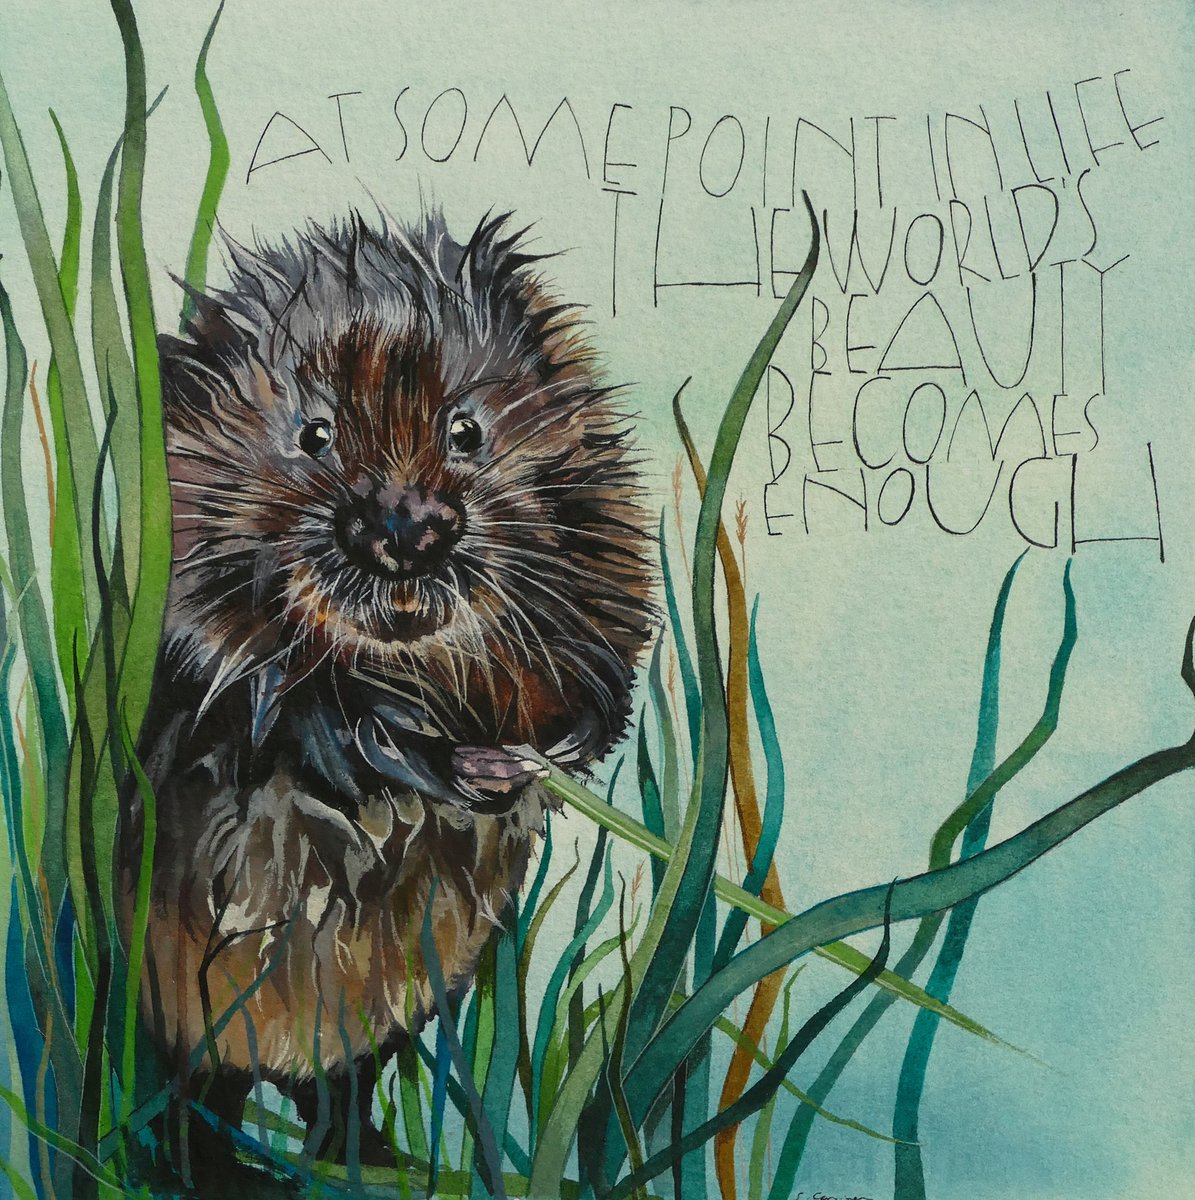 A week watervole today. 

I must try again at painting one soon. 
And oh how I wish they lived near to me.